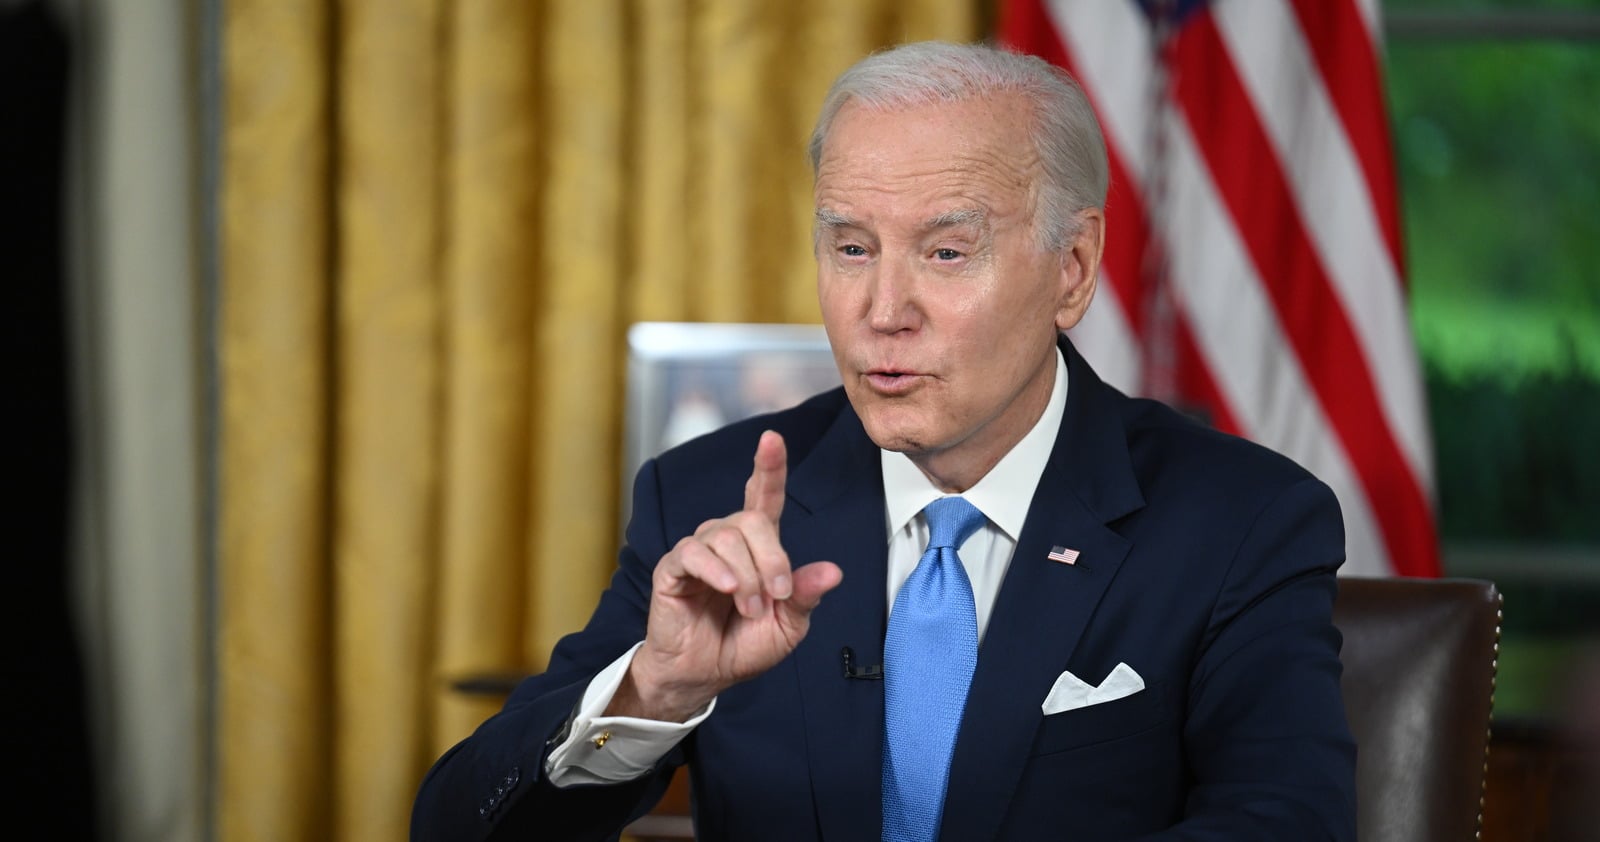 GOP Leader Suggests Joe Biden May Be Panicking Over Allegations - 'Joe Biden Has Officially Lawyered Up,' He Alleges